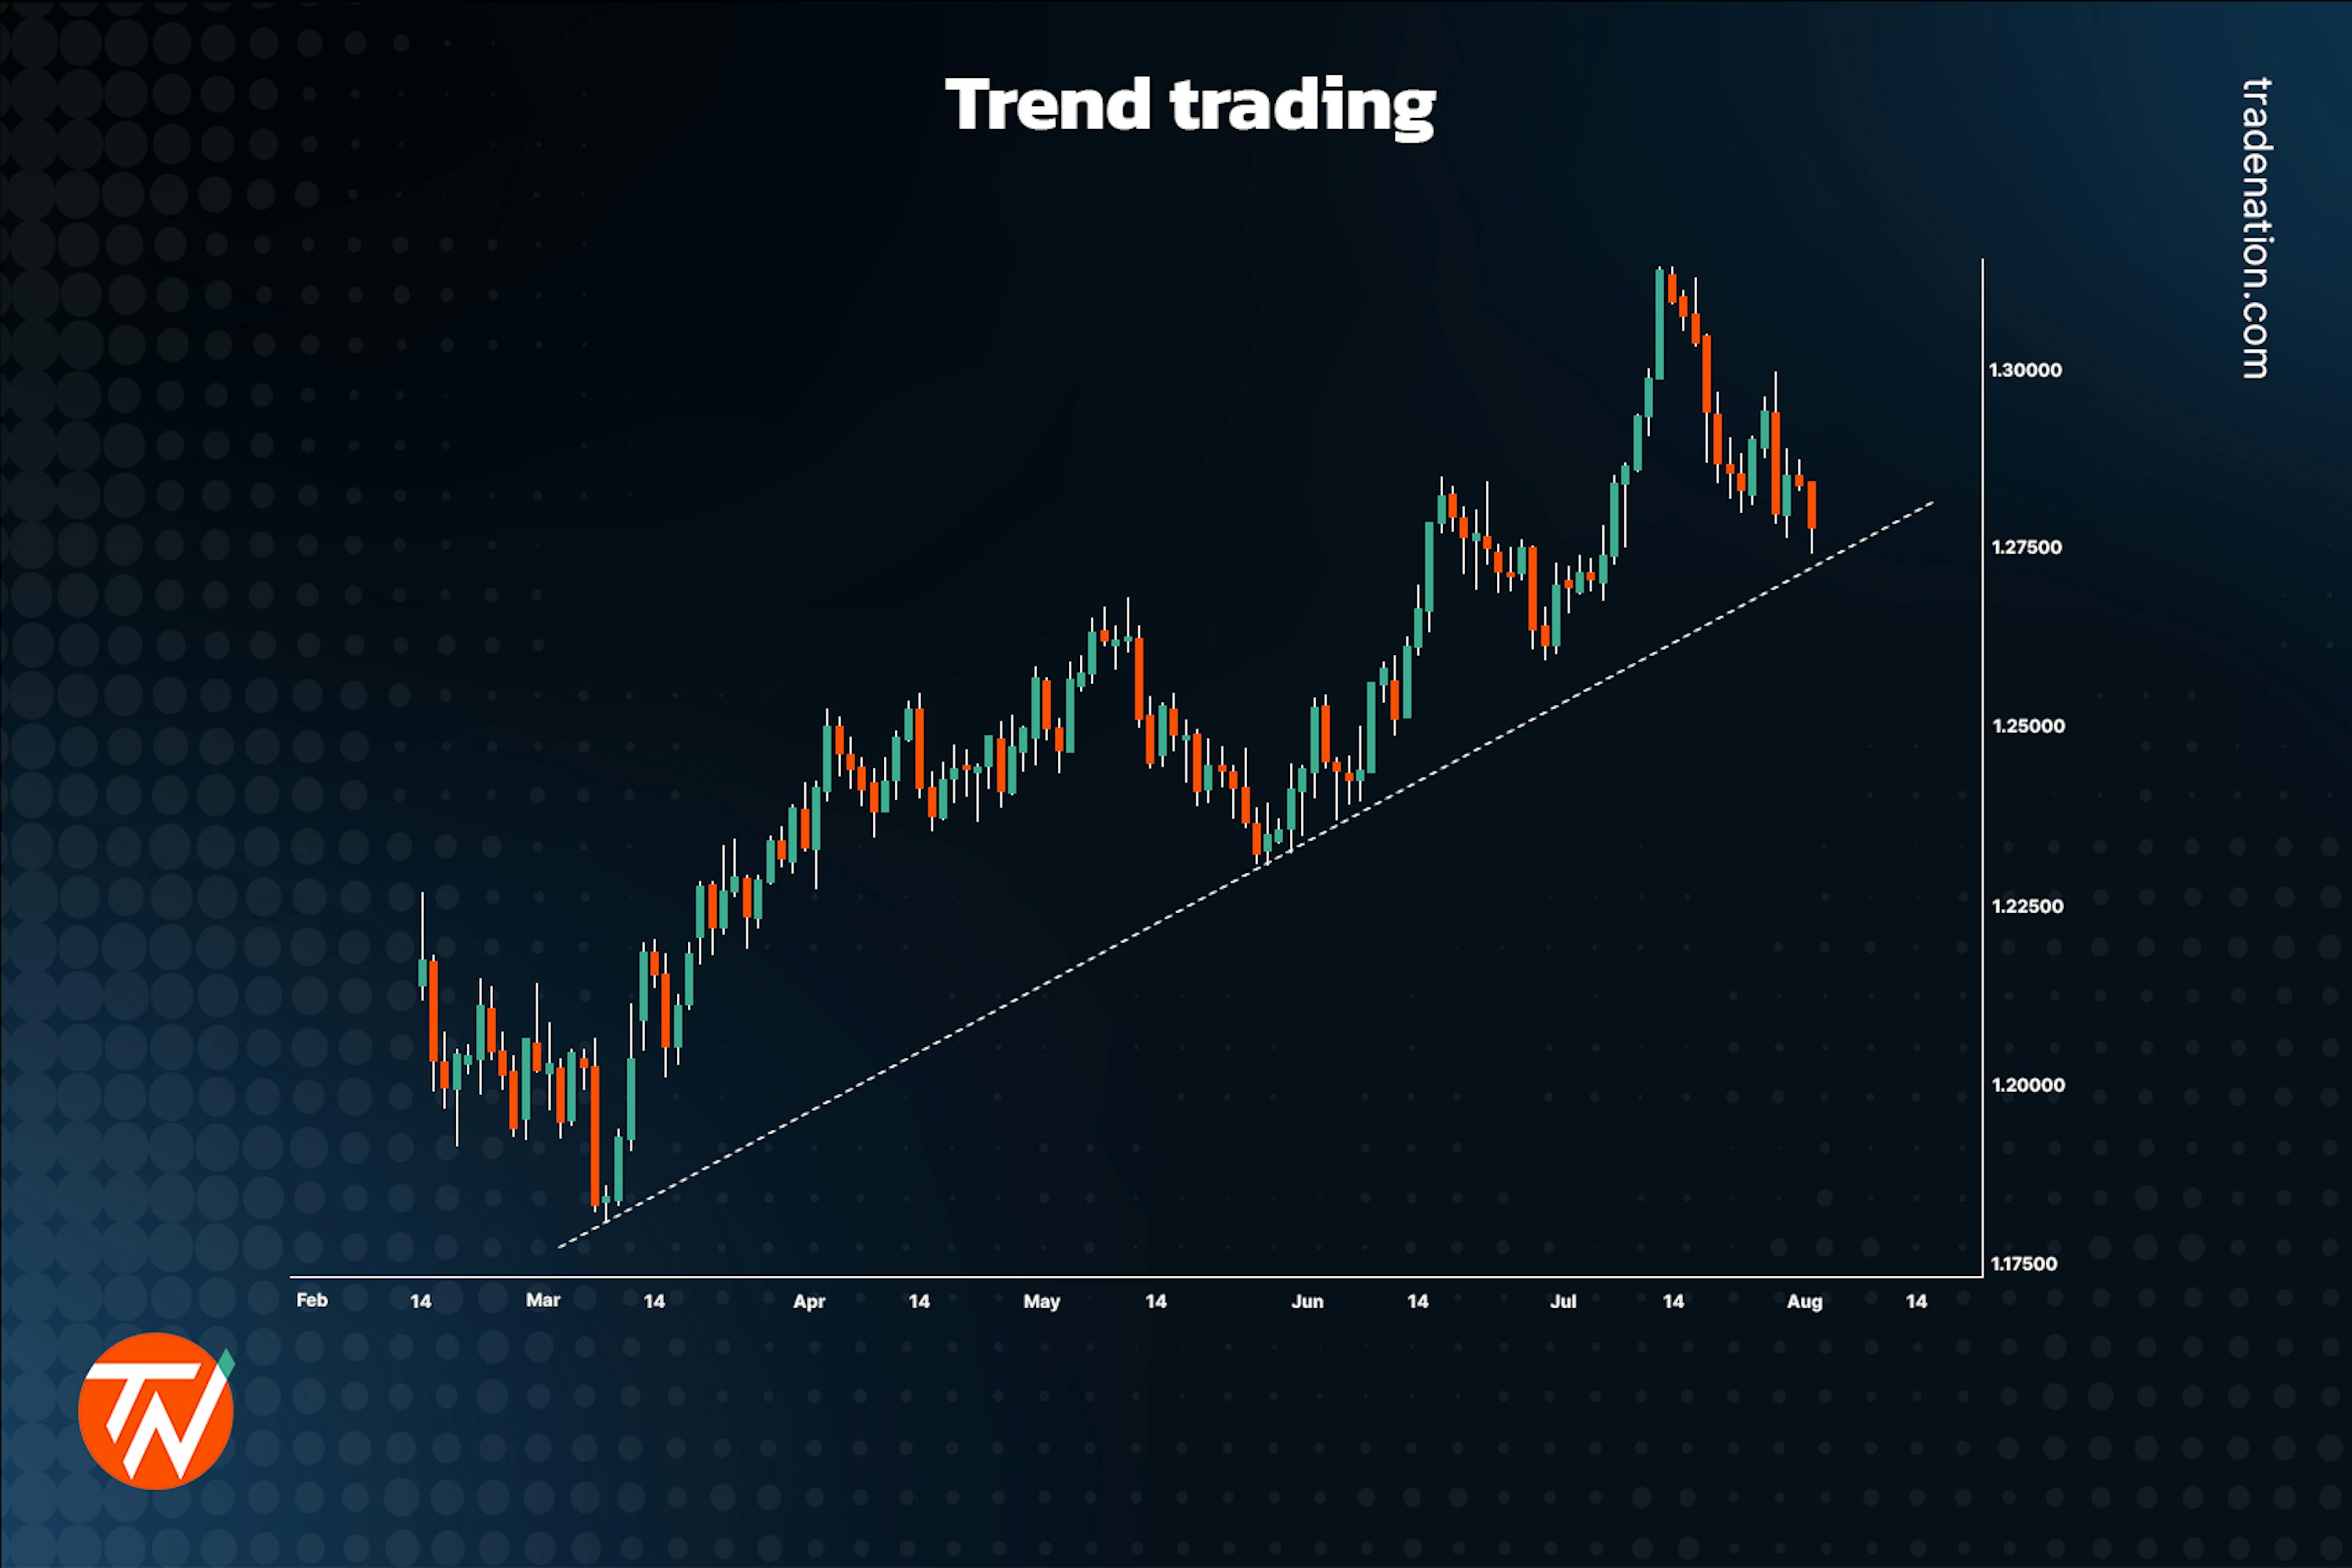 Trends in trading